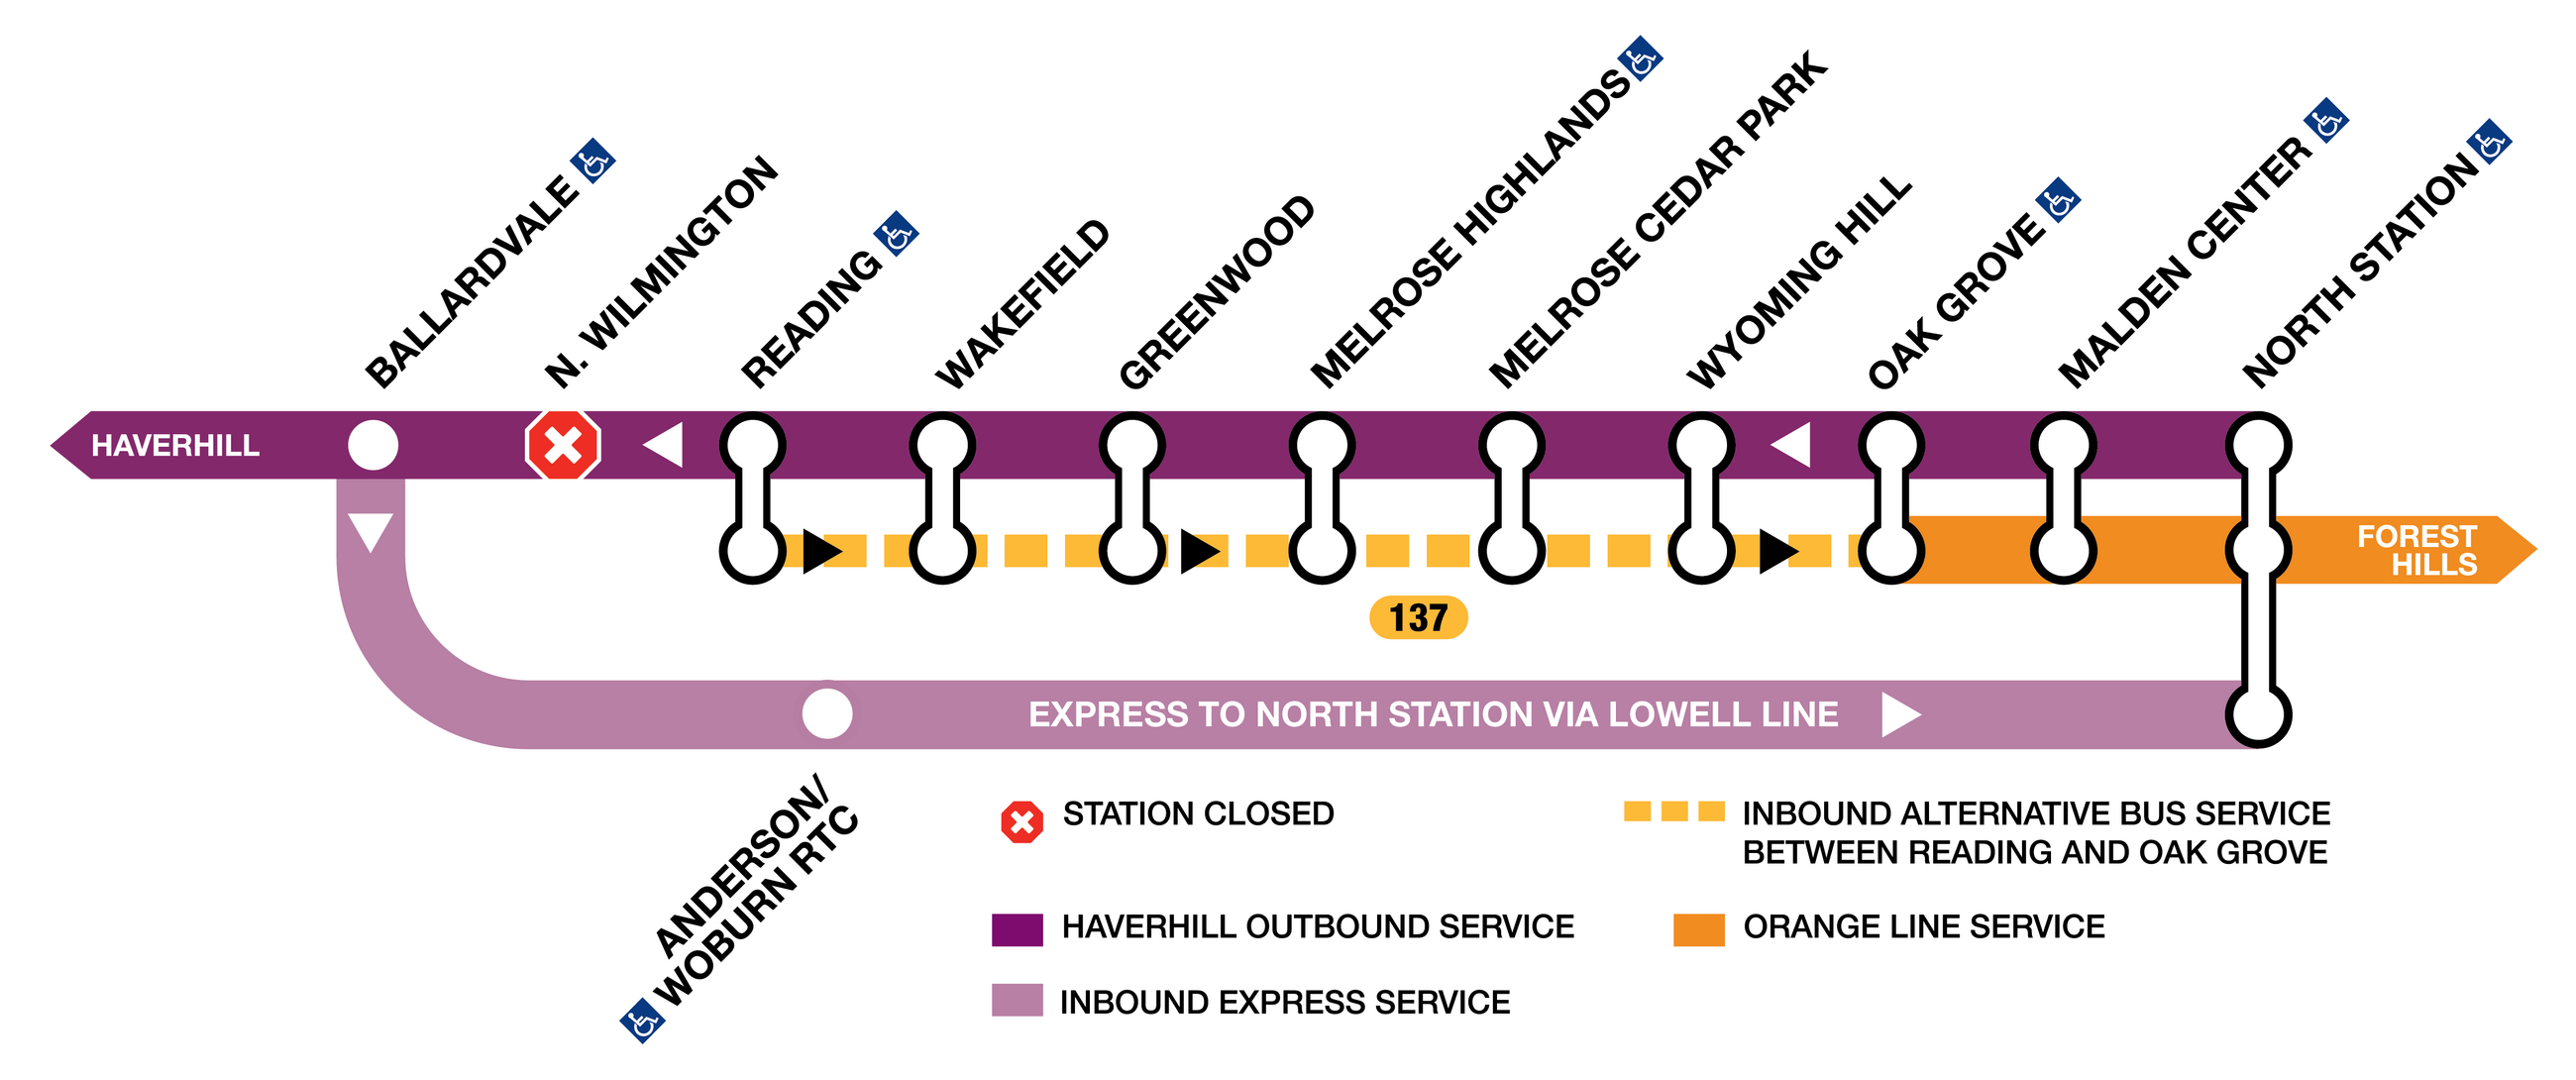 Shuttle service graphic for the Haverhill Line Commuter Rail service changes